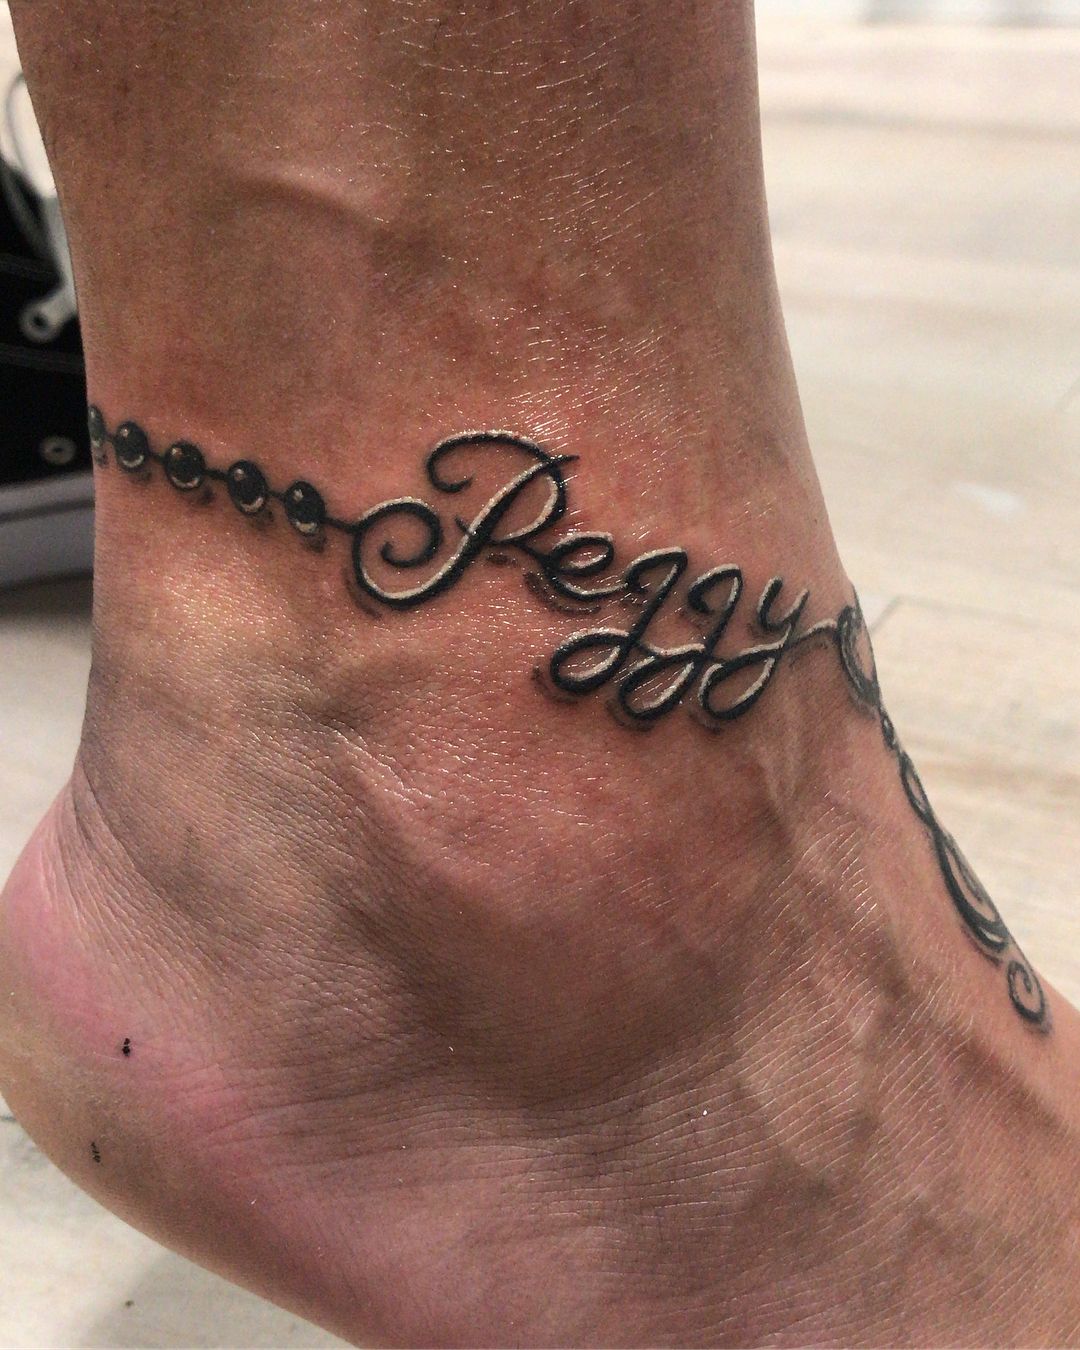 Ankle Rosary tattoos